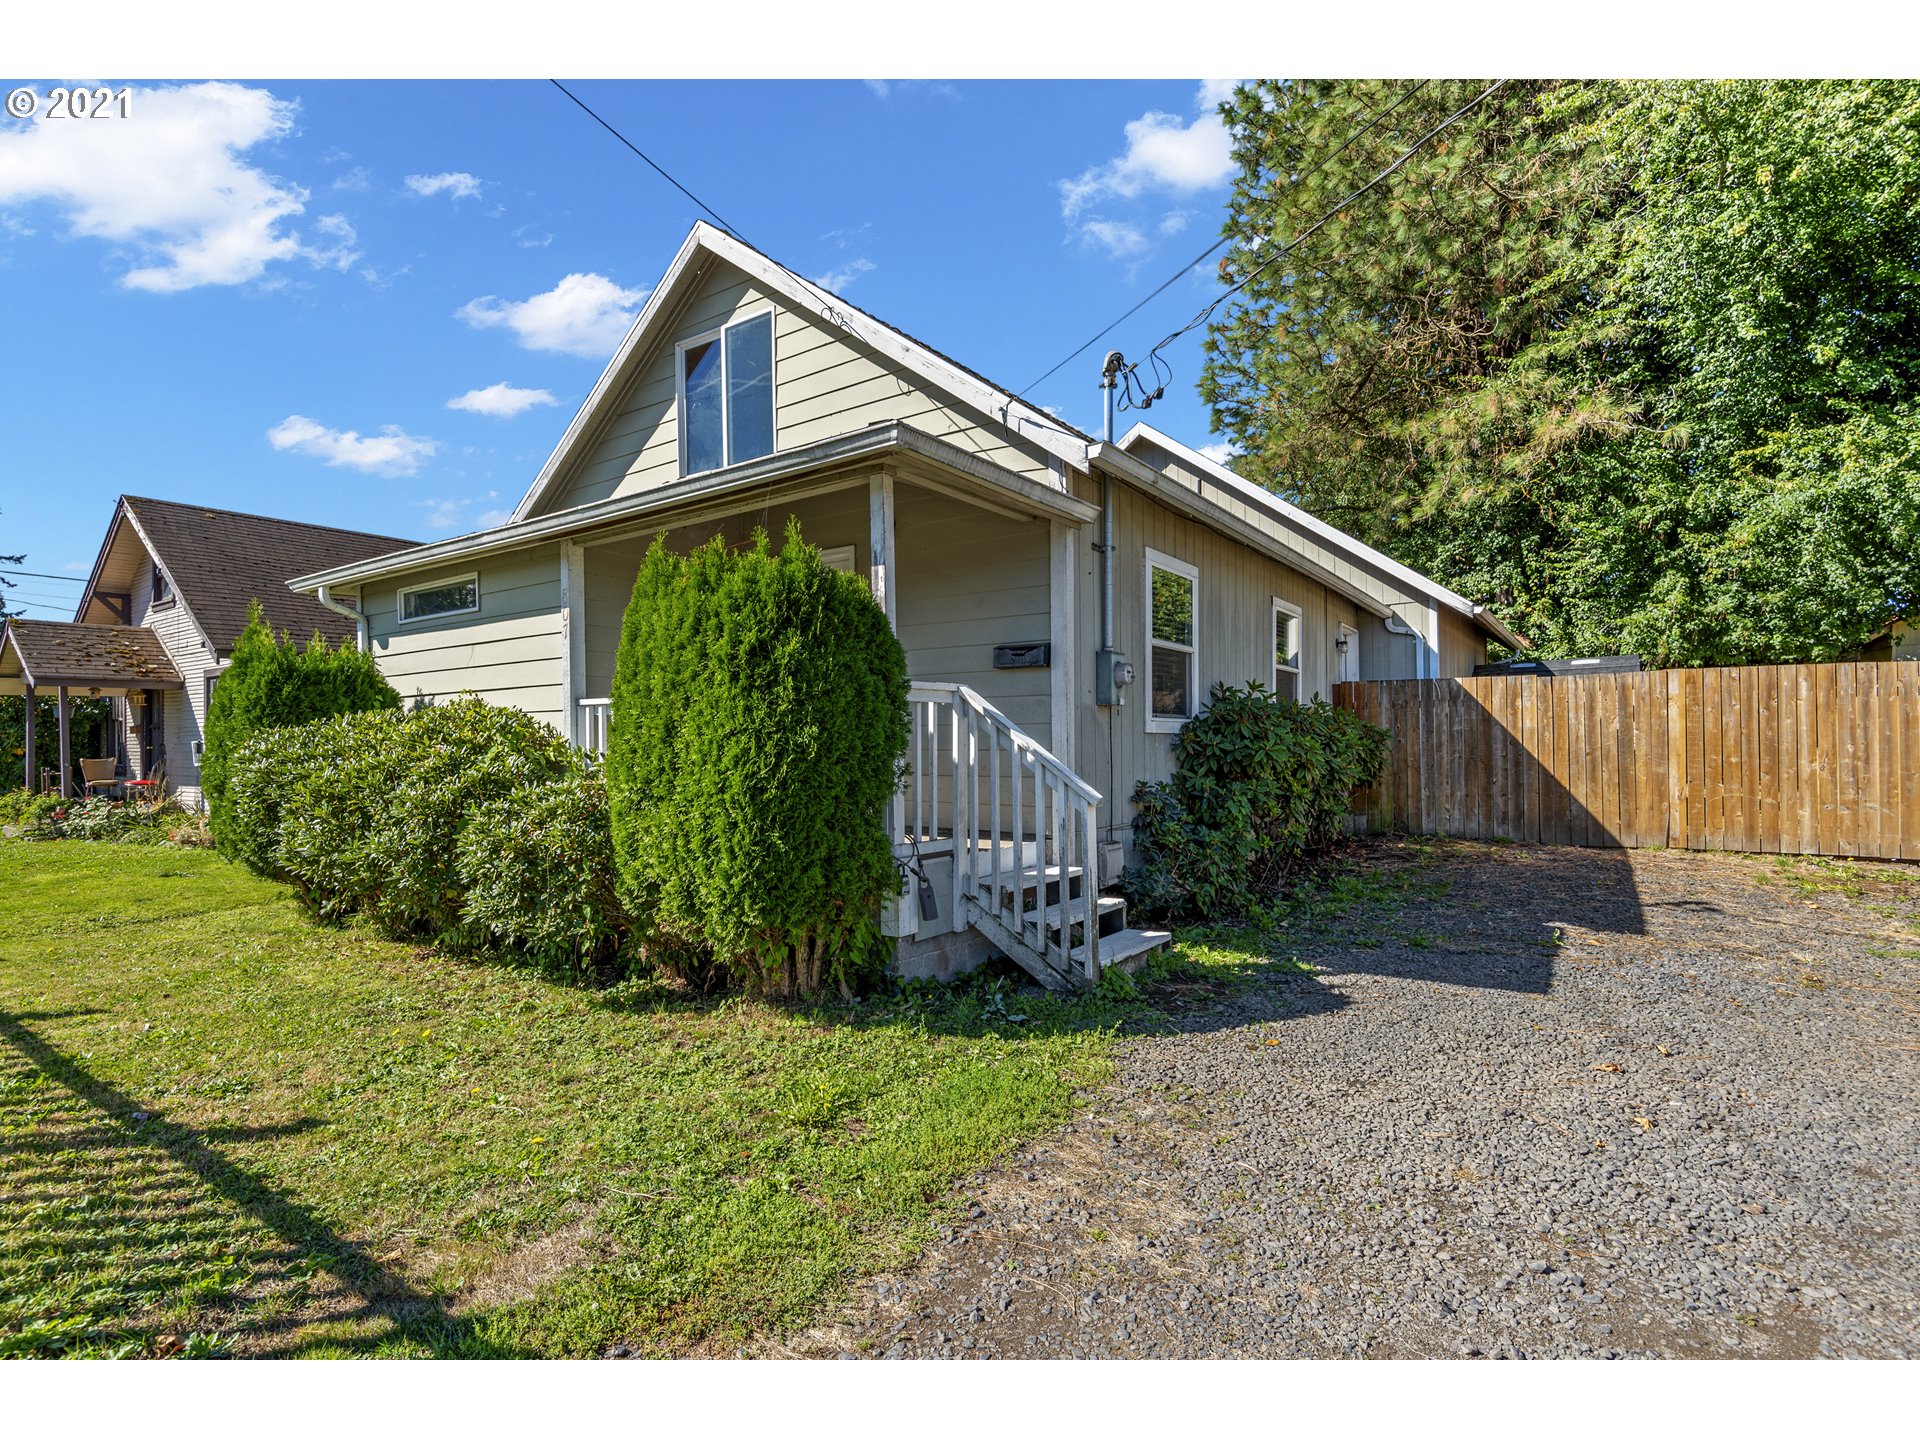 807 S 8TH AVE (1 of 19)